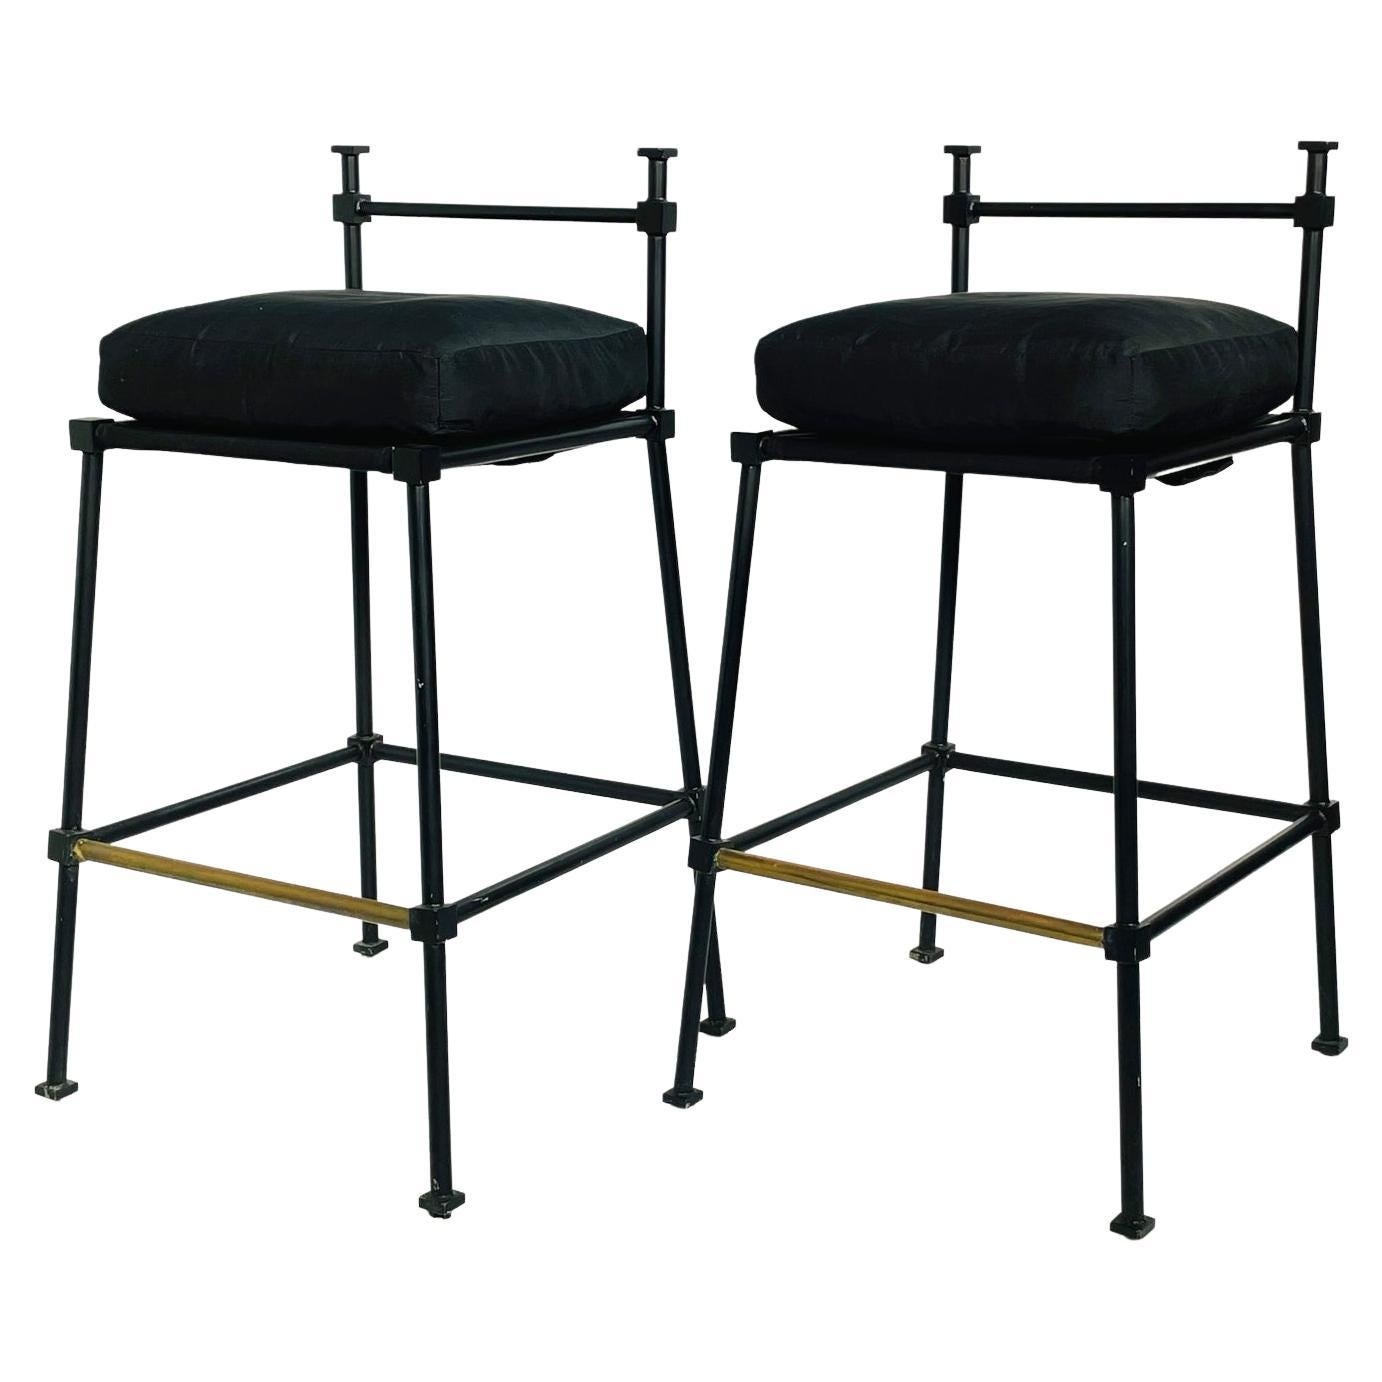 Pair of Barstools in Solid Steel in Powder Black Finish